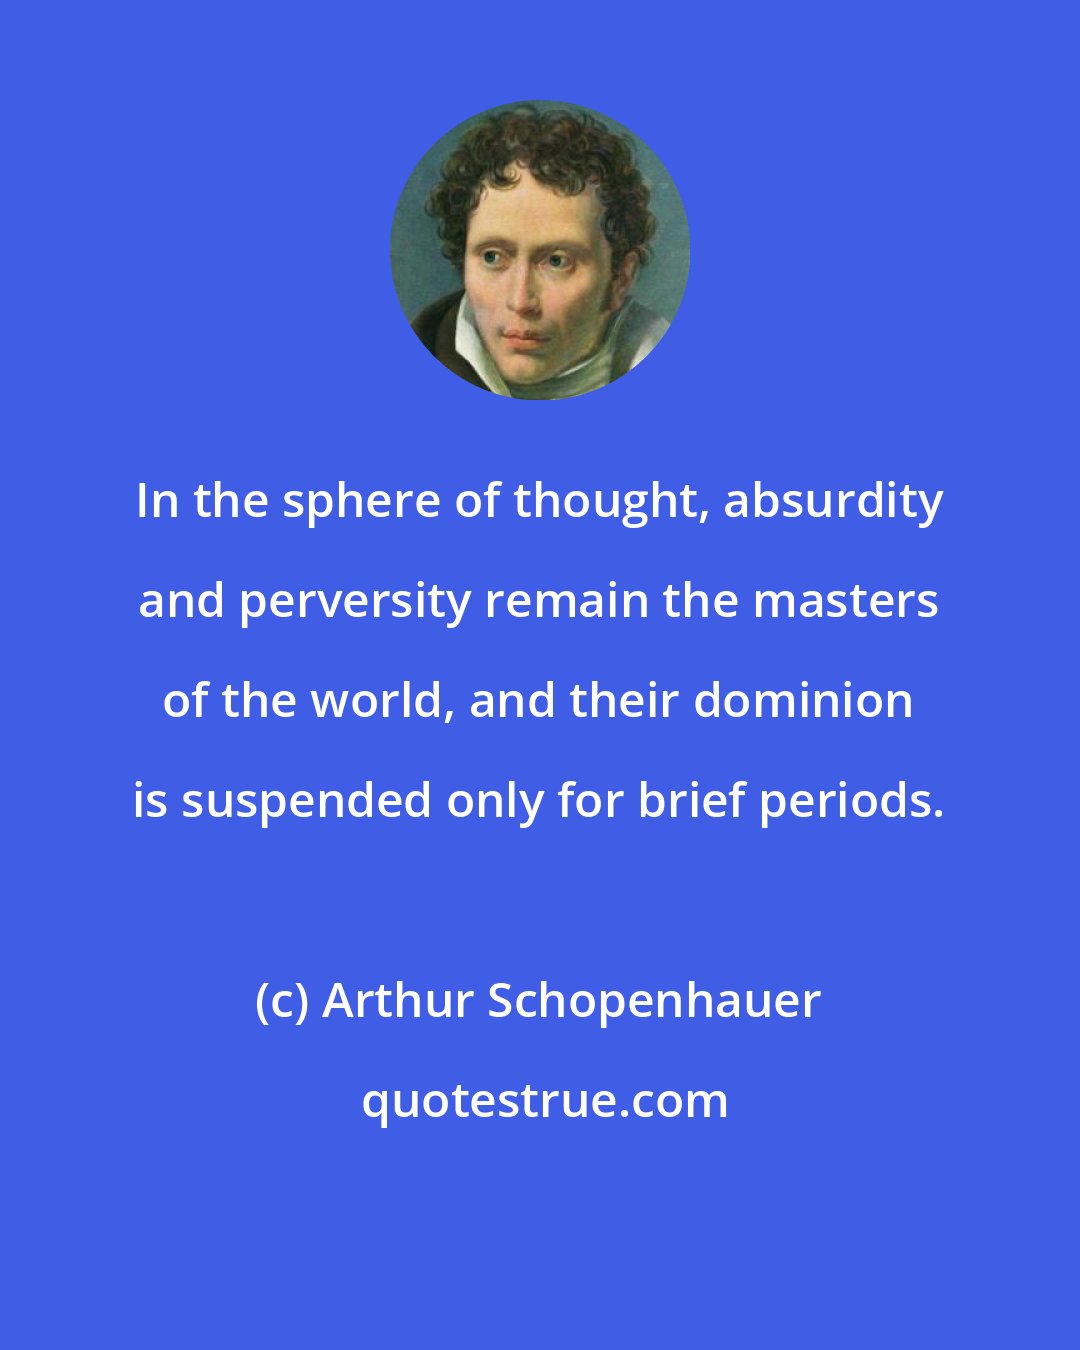 Arthur Schopenhauer: In the sphere of thought, absurdity and perversity remain the masters of the world, and their dominion is suspended only for brief periods.